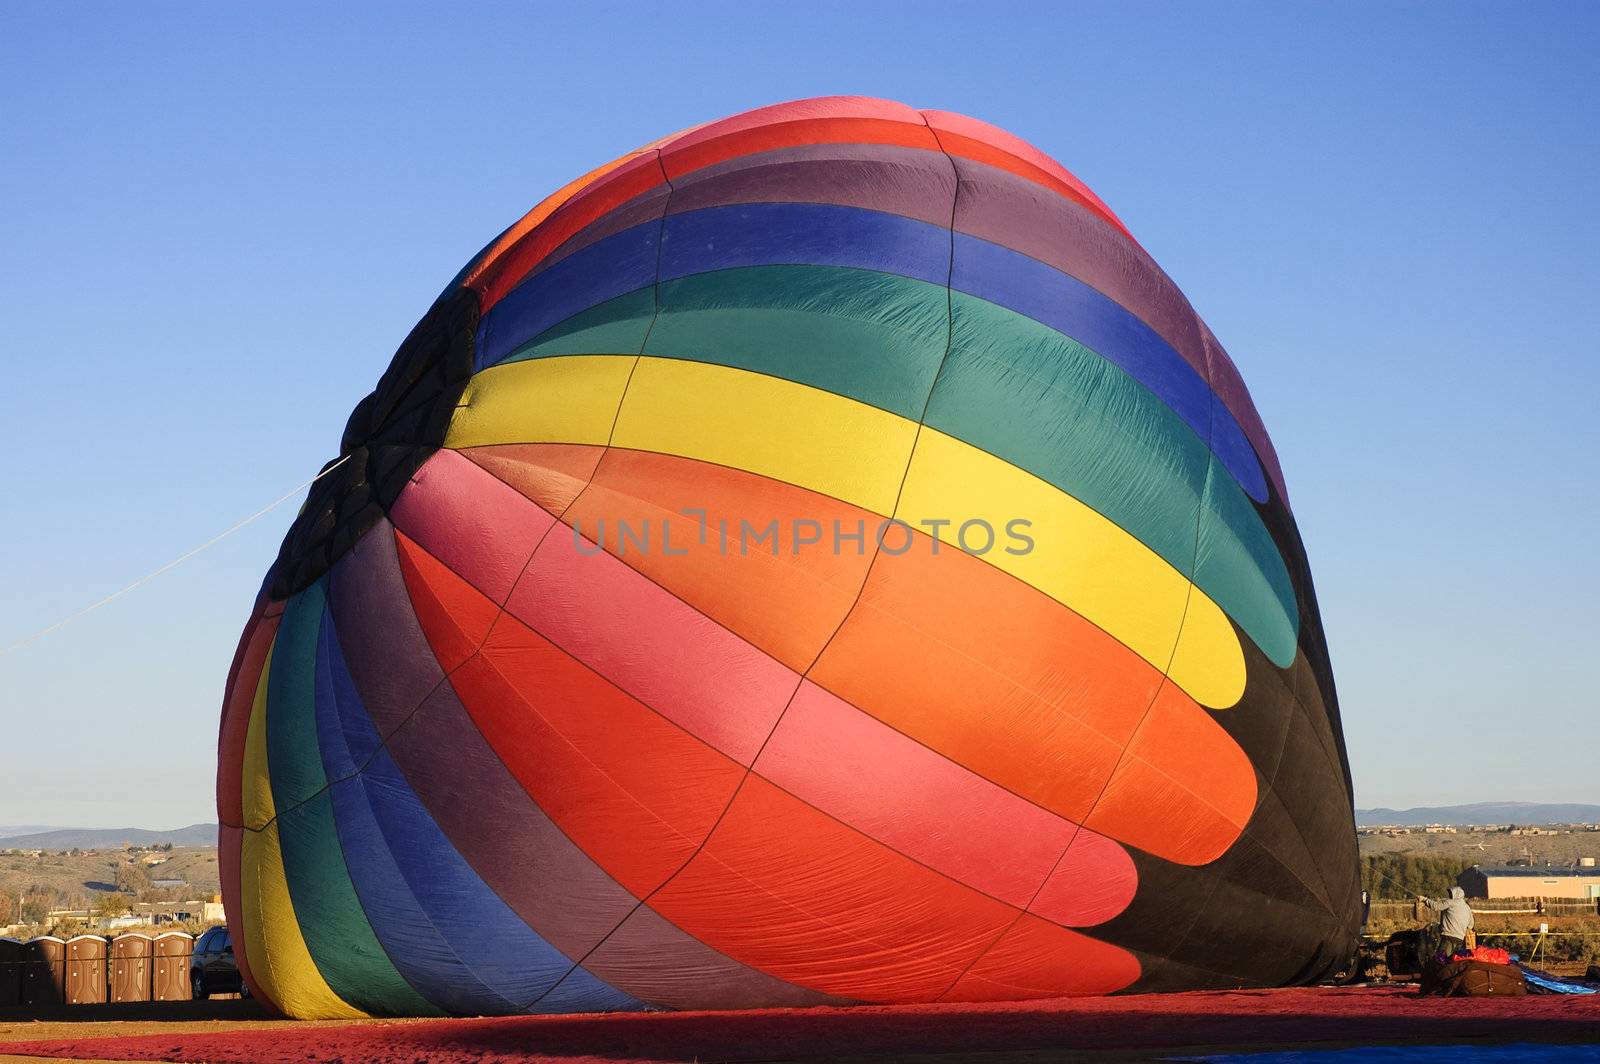 Inflating hot air ballon by jeffbanke